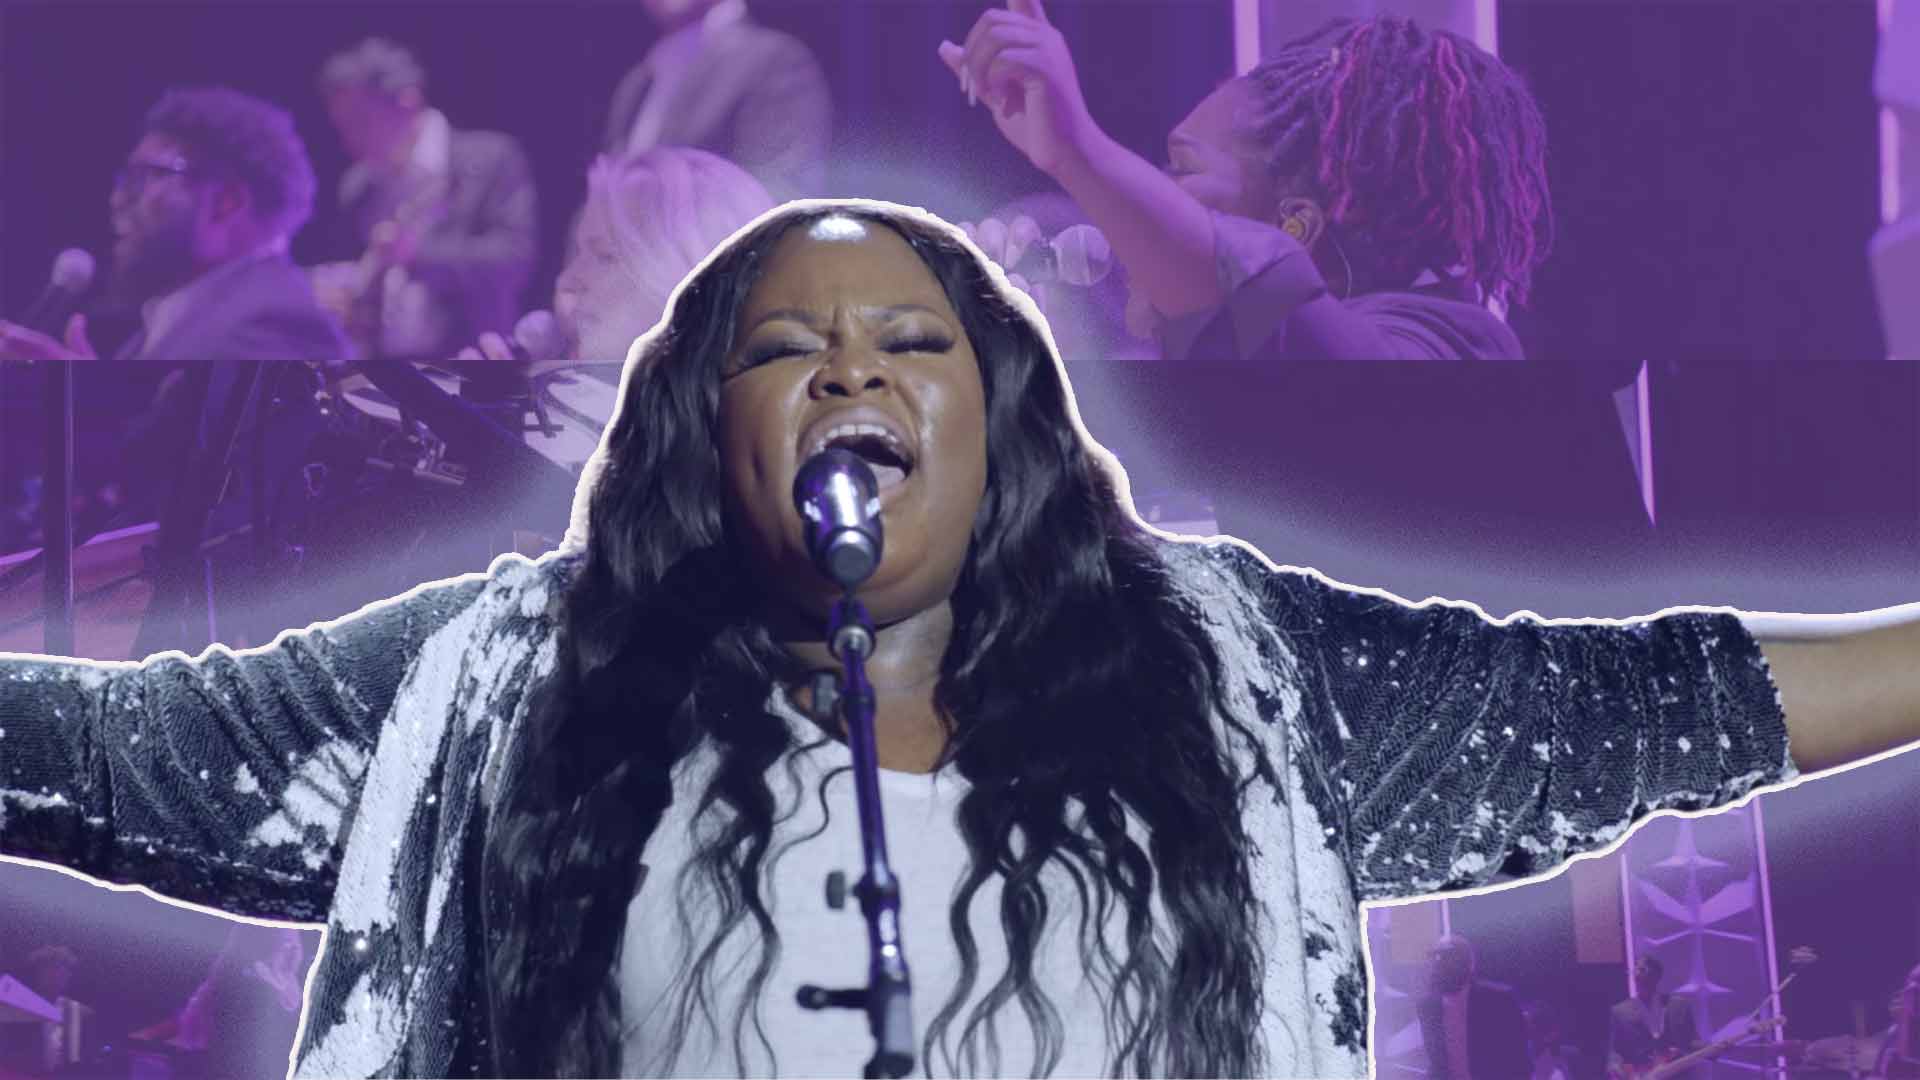 Tasha Cobbs Leonard in a Sequin Jacket Sings into a Microphone on a background with her worship band in concert